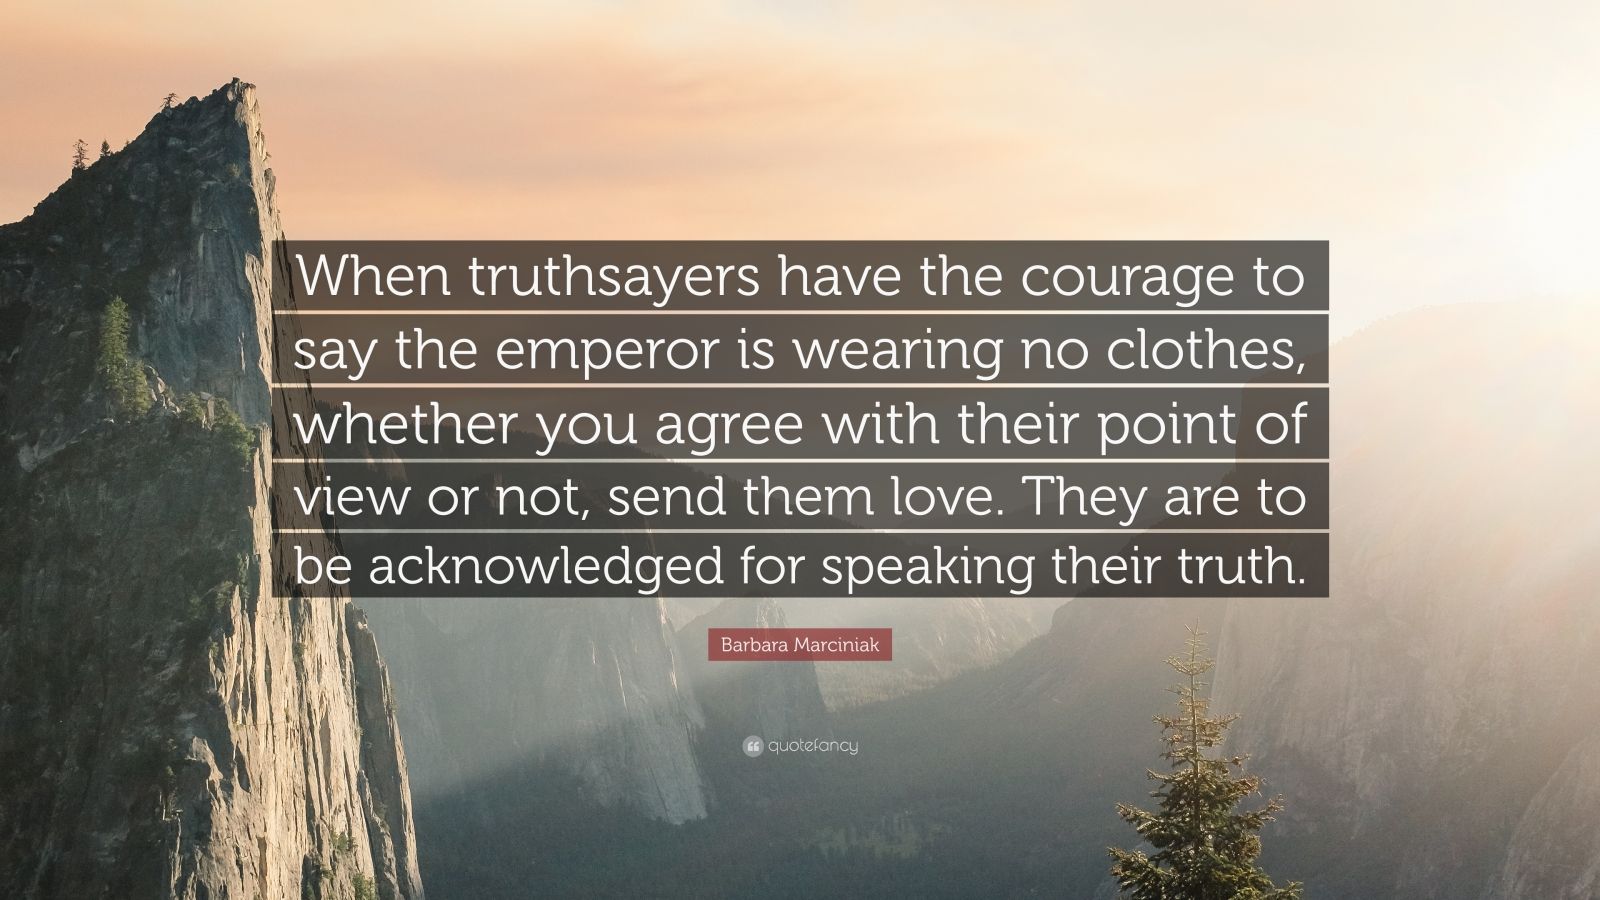 Barbara Marciniak Quote: “When truthsayers have the courage to say the